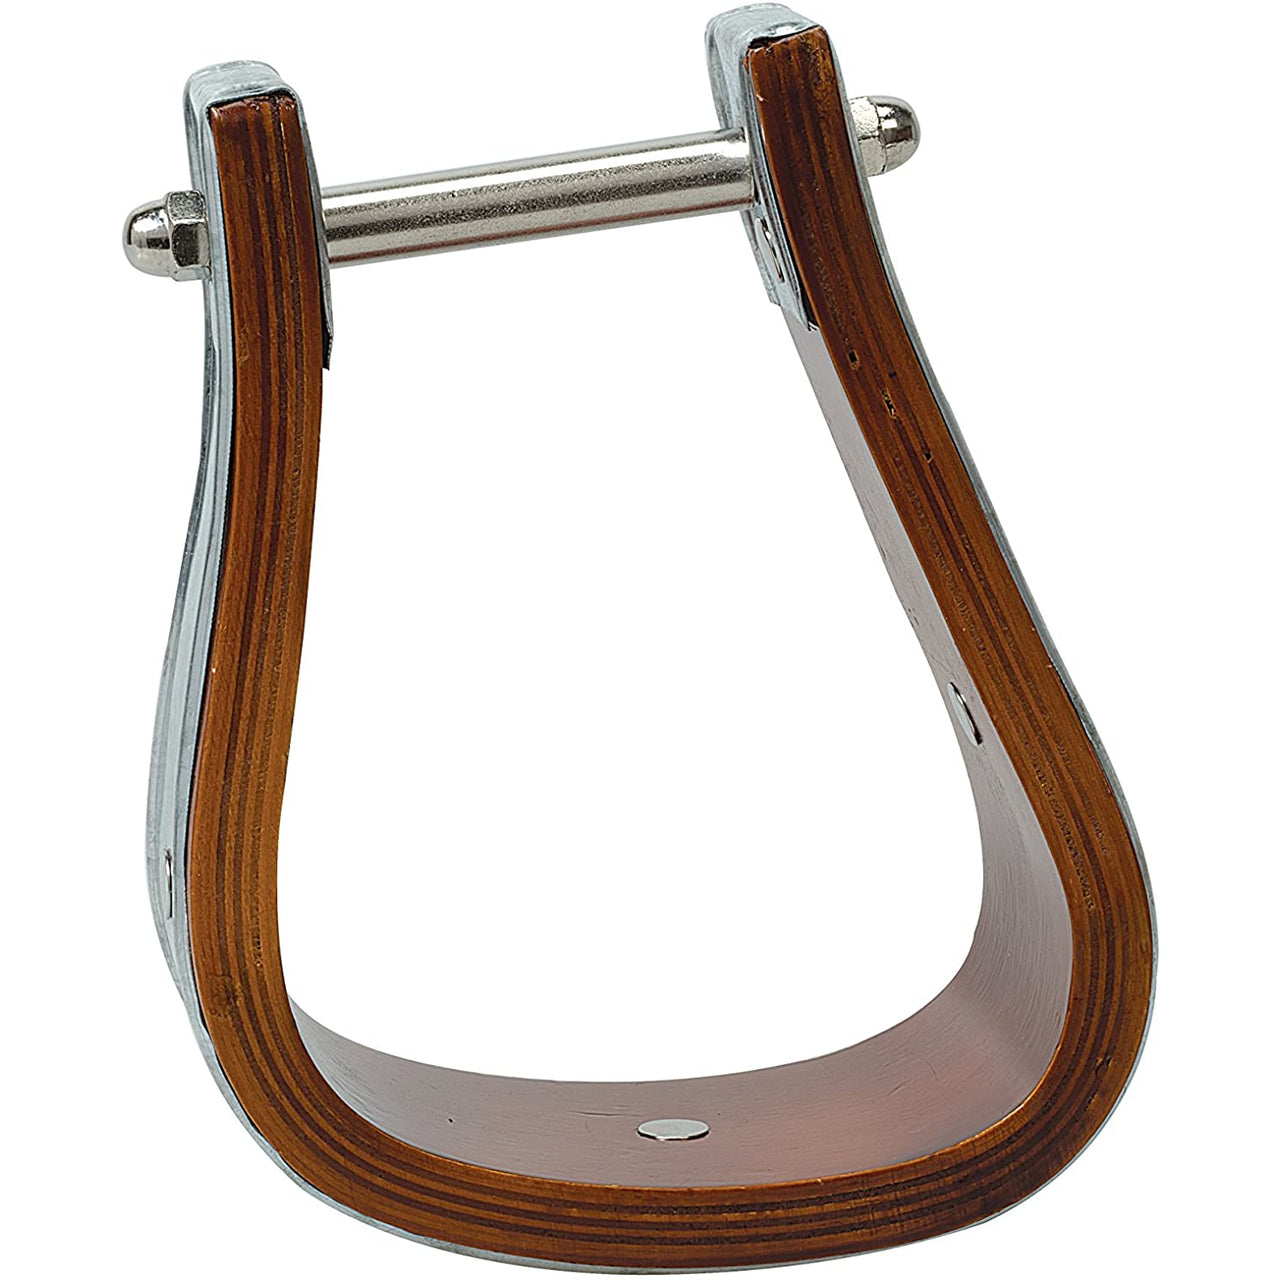 Weaver Leather Sloped Stirrup Wooden with Galvanized Binding